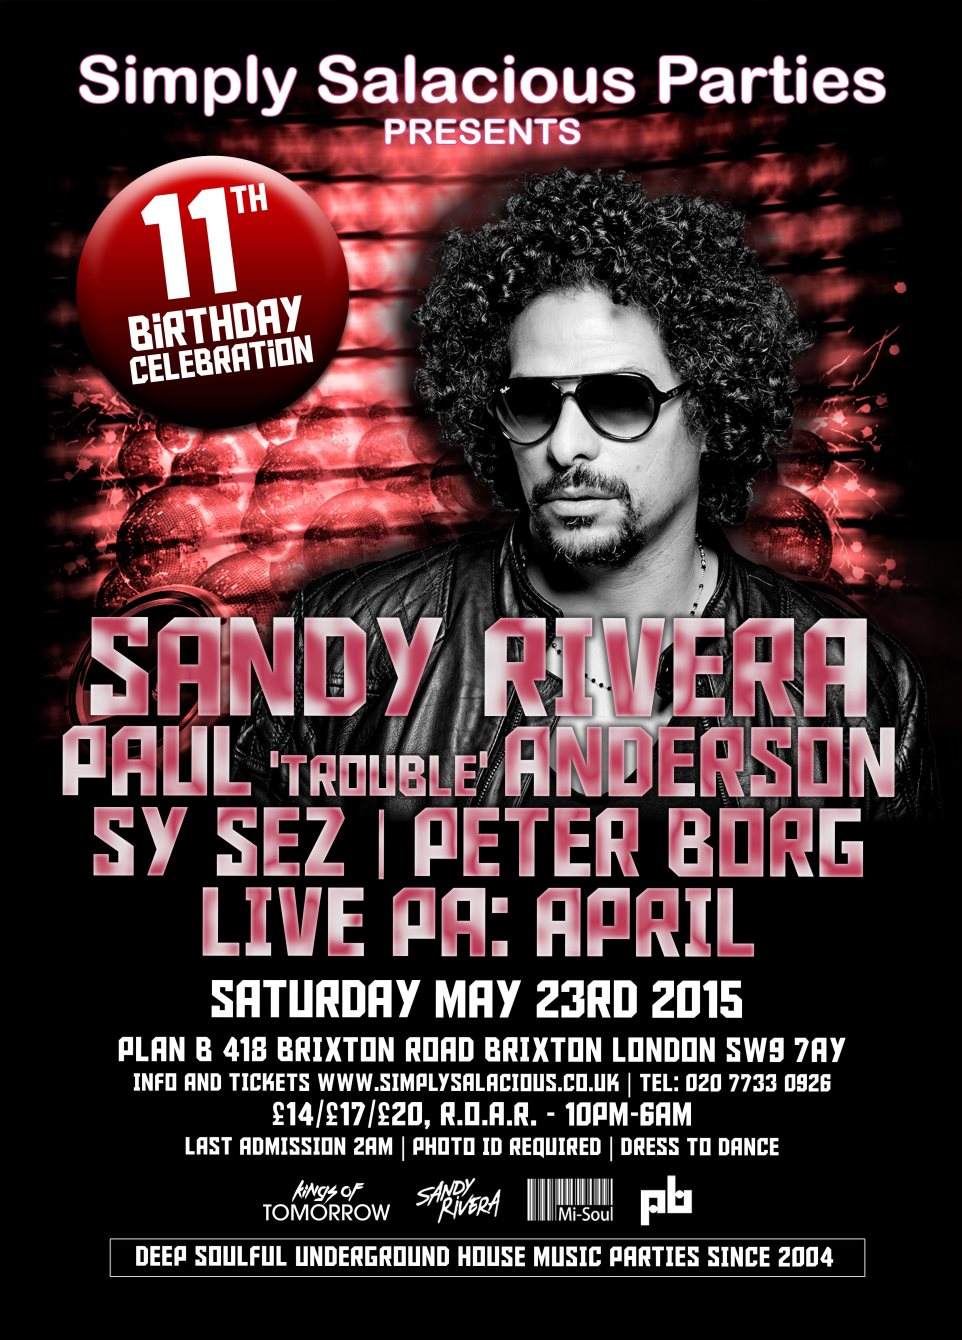 Simply Salacious Parties 11th Birthday Sandy Rivera, Paul Trouble Anderson, Live PA From April - Página frontal